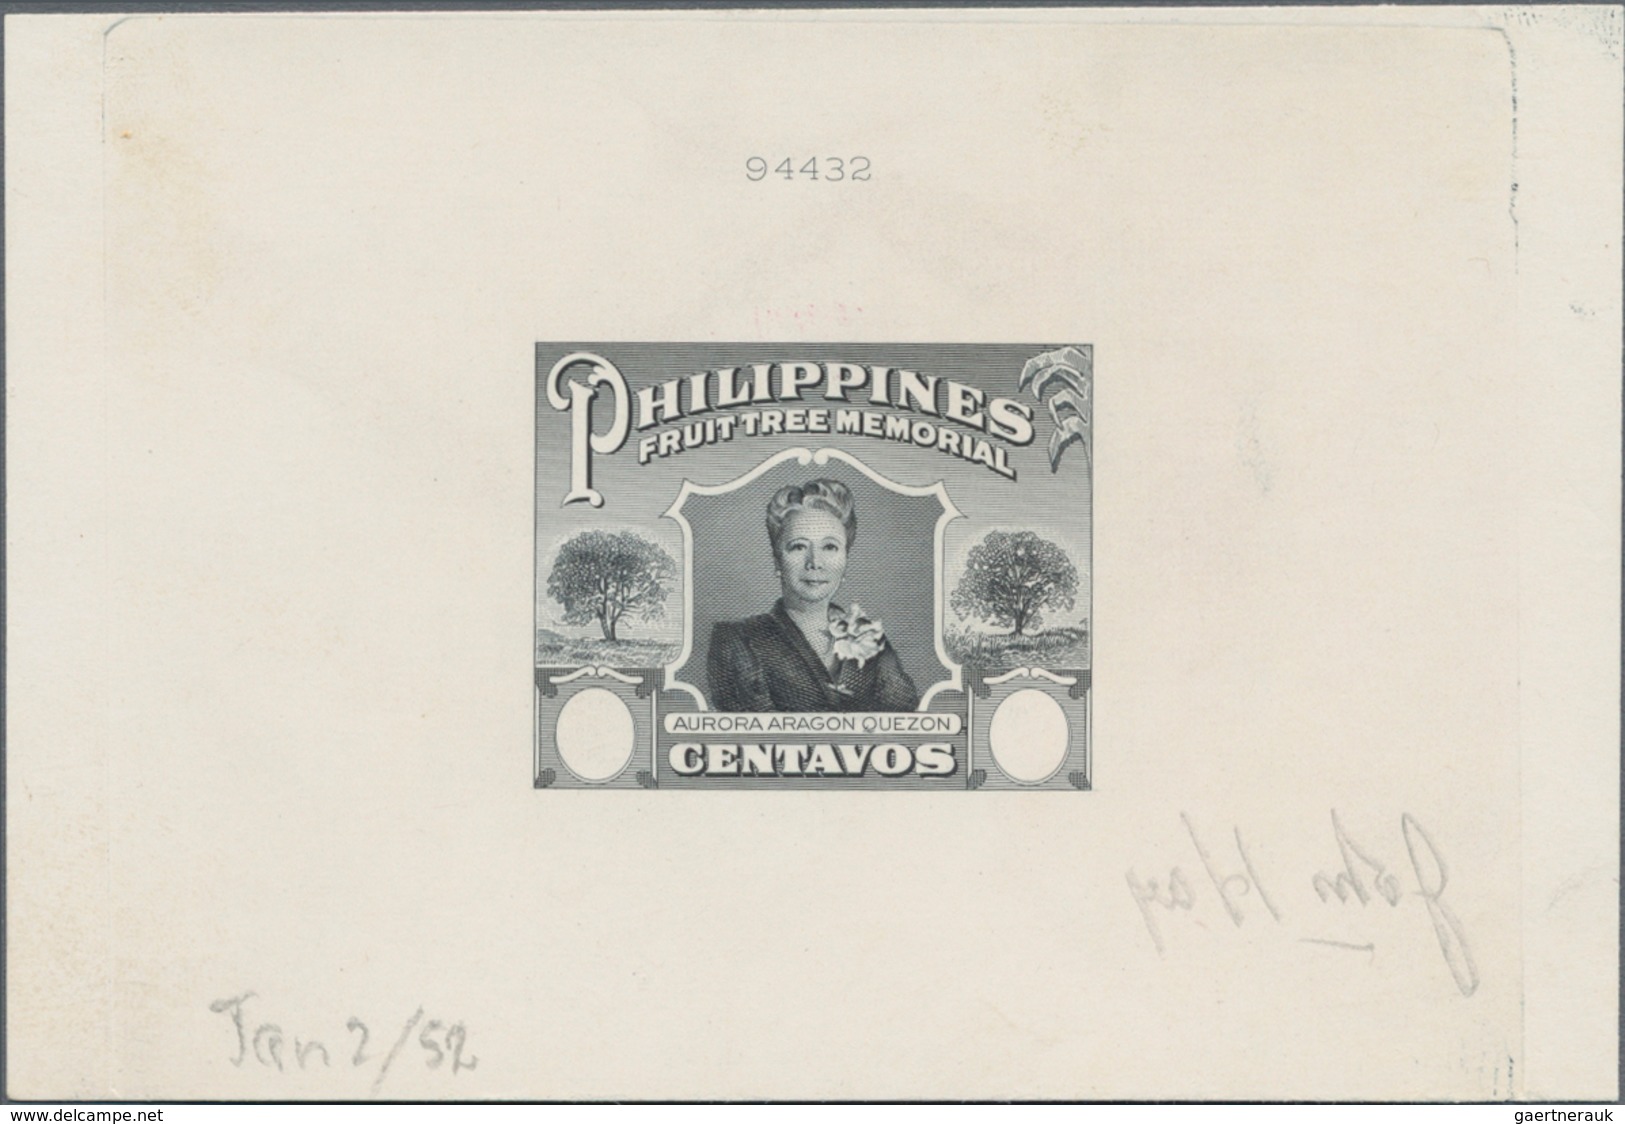 Philippinen: 1952, Fruit Tree Memorial "Aurora A. Quezon", Group Of Four ABN Single Die Proofs (thre - Filipinas